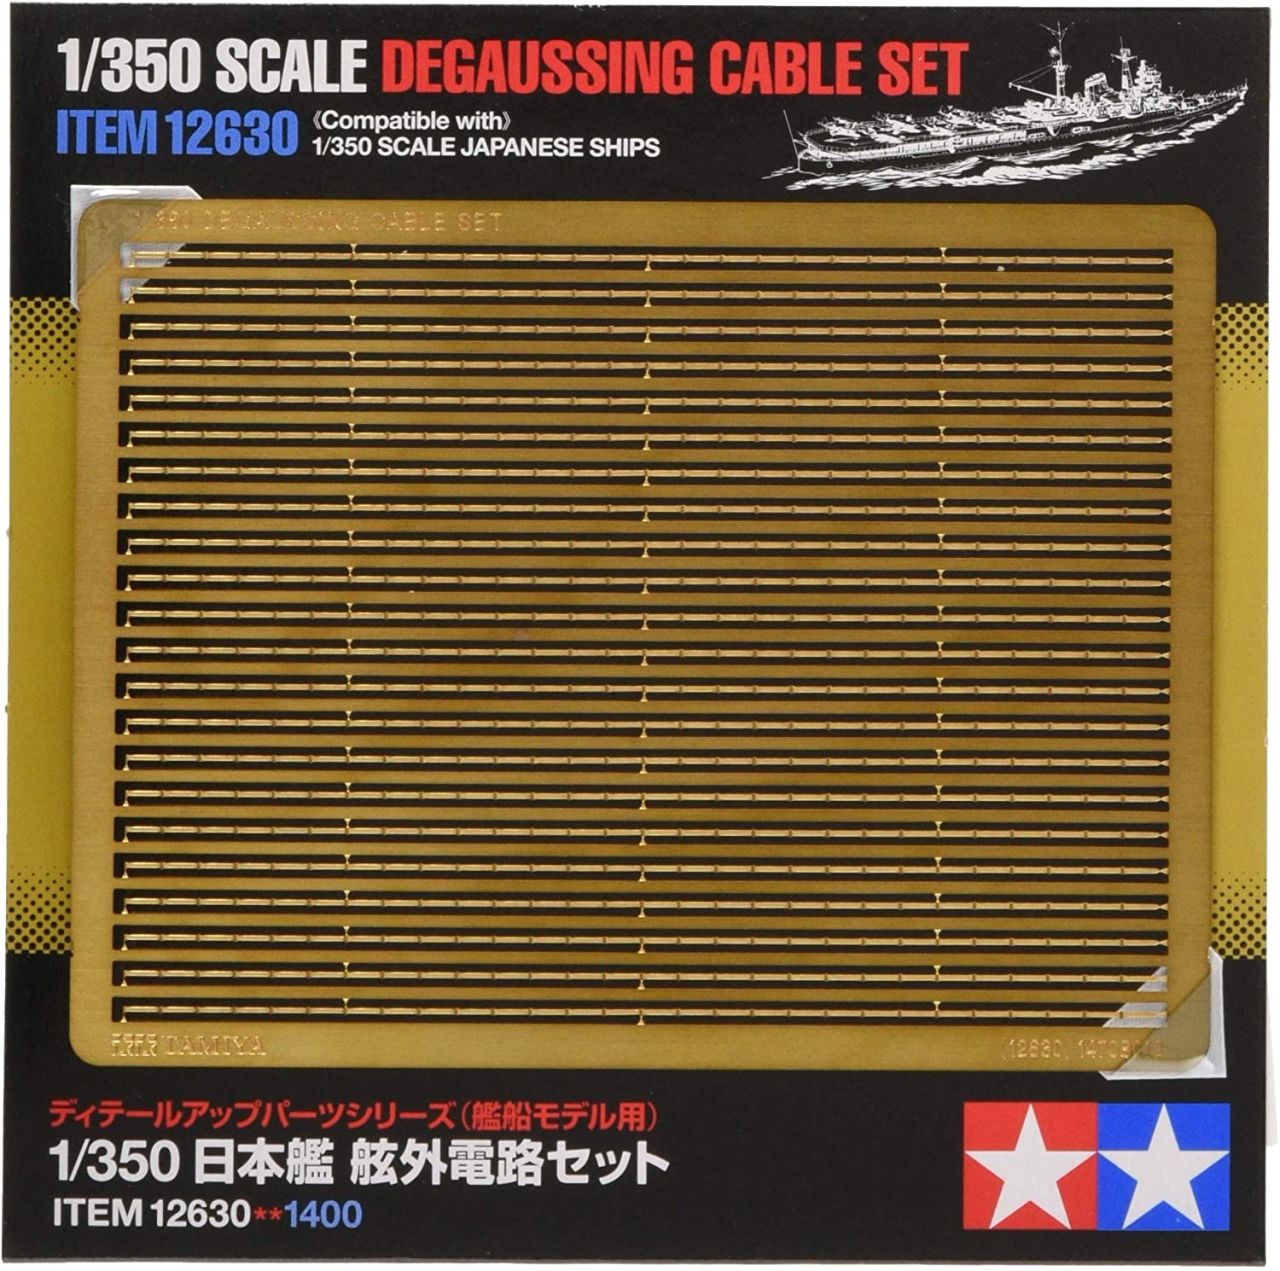 Tamiya 12630 Degaussing Cable Set Photo-Etched Detail Set for Ships